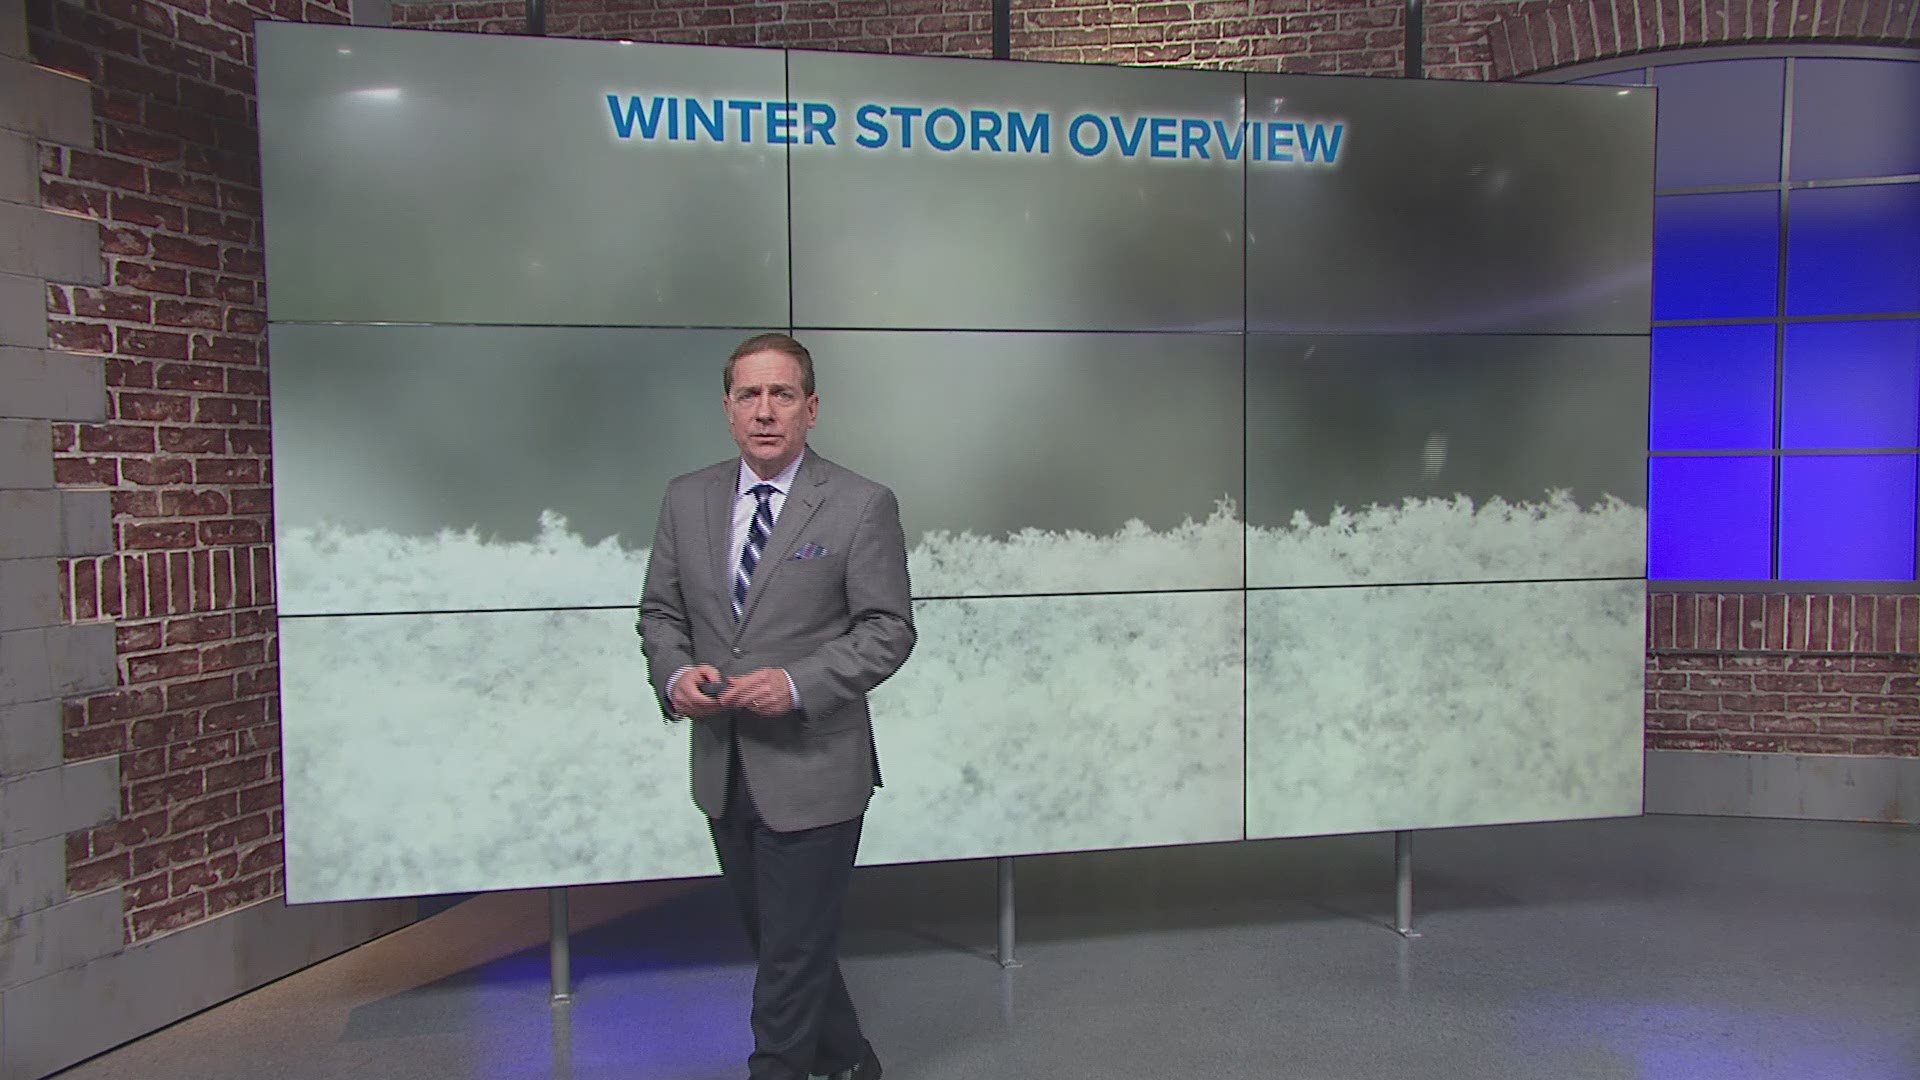 Meteorologist Topper Shutt has your latest weather forecast.